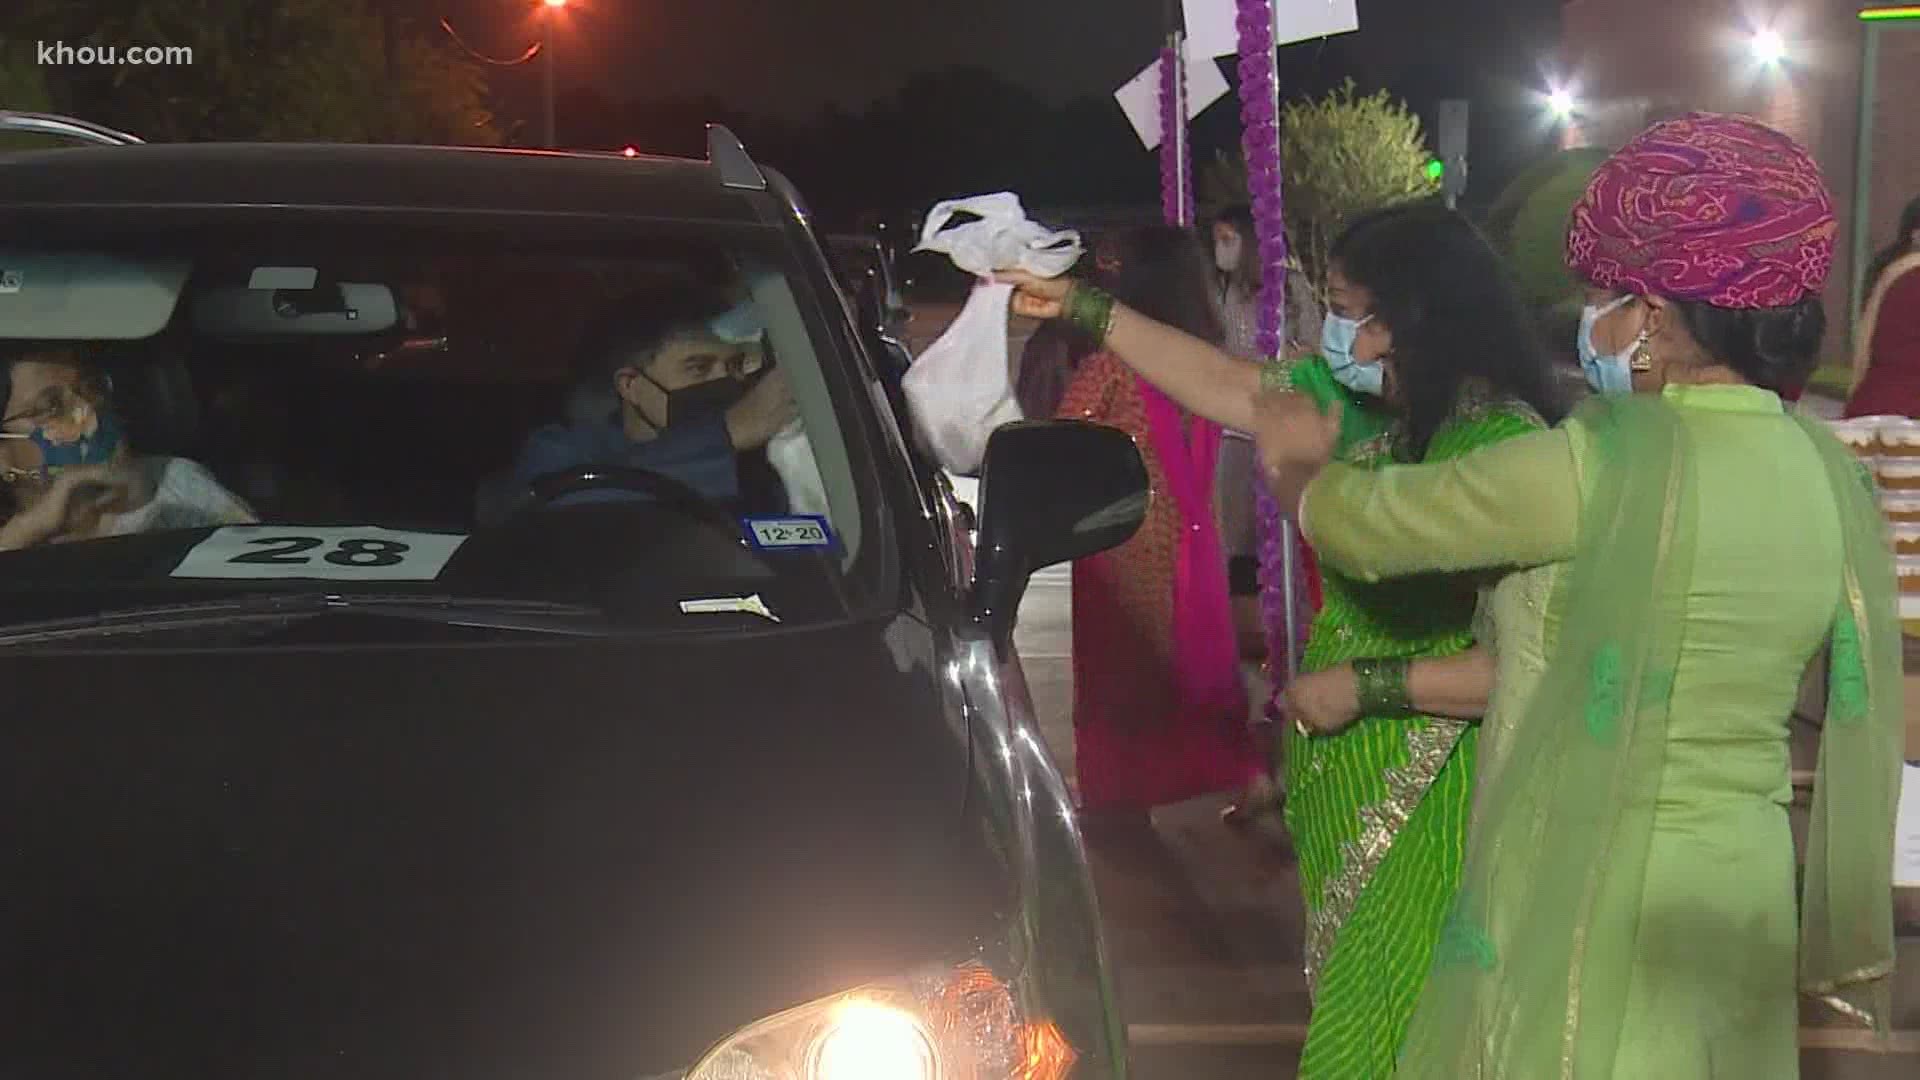 KHOU 11 photojournalist Chris Carr shows how people are celebrating Diwali in Houston during the COVID-19 pandemic.